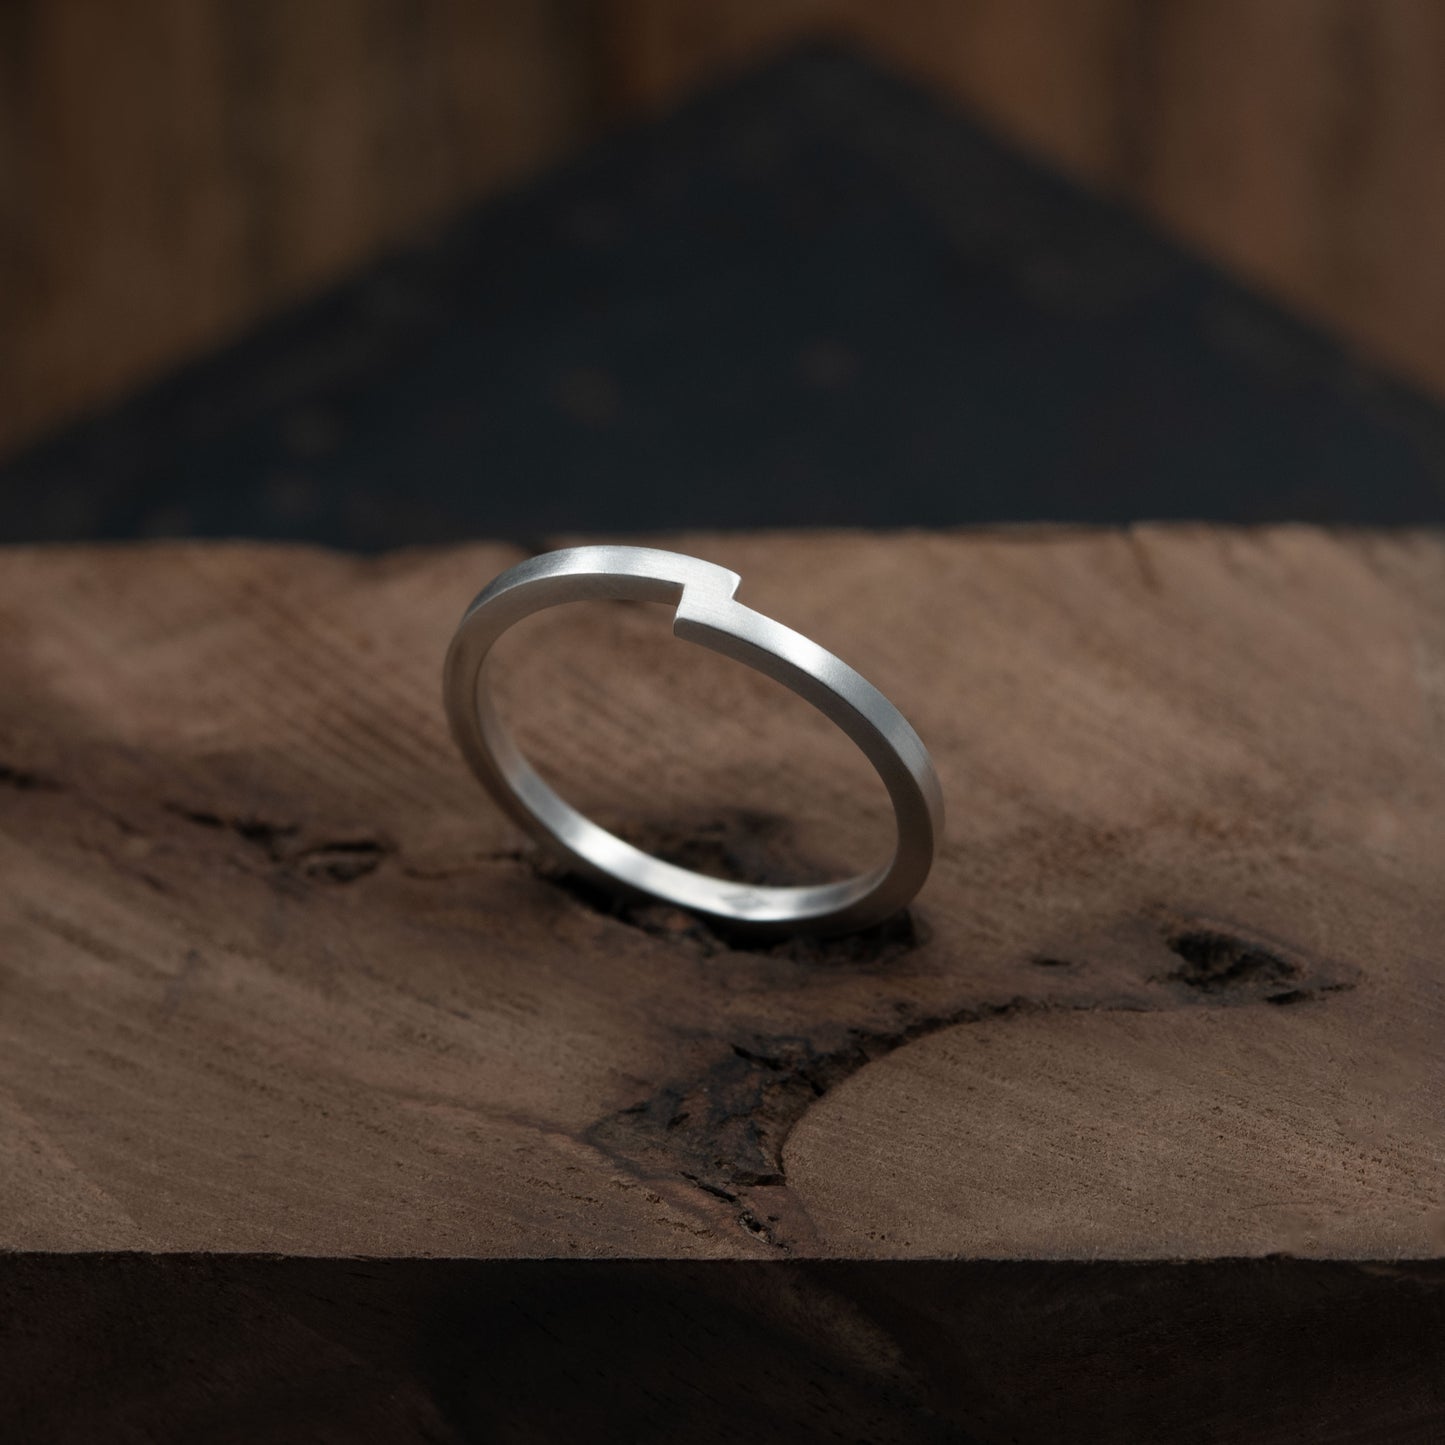 Minimalistic band silver ring. Crafted by hand by a g j c from a 1,5 mm square shape band of solid sterling silver.